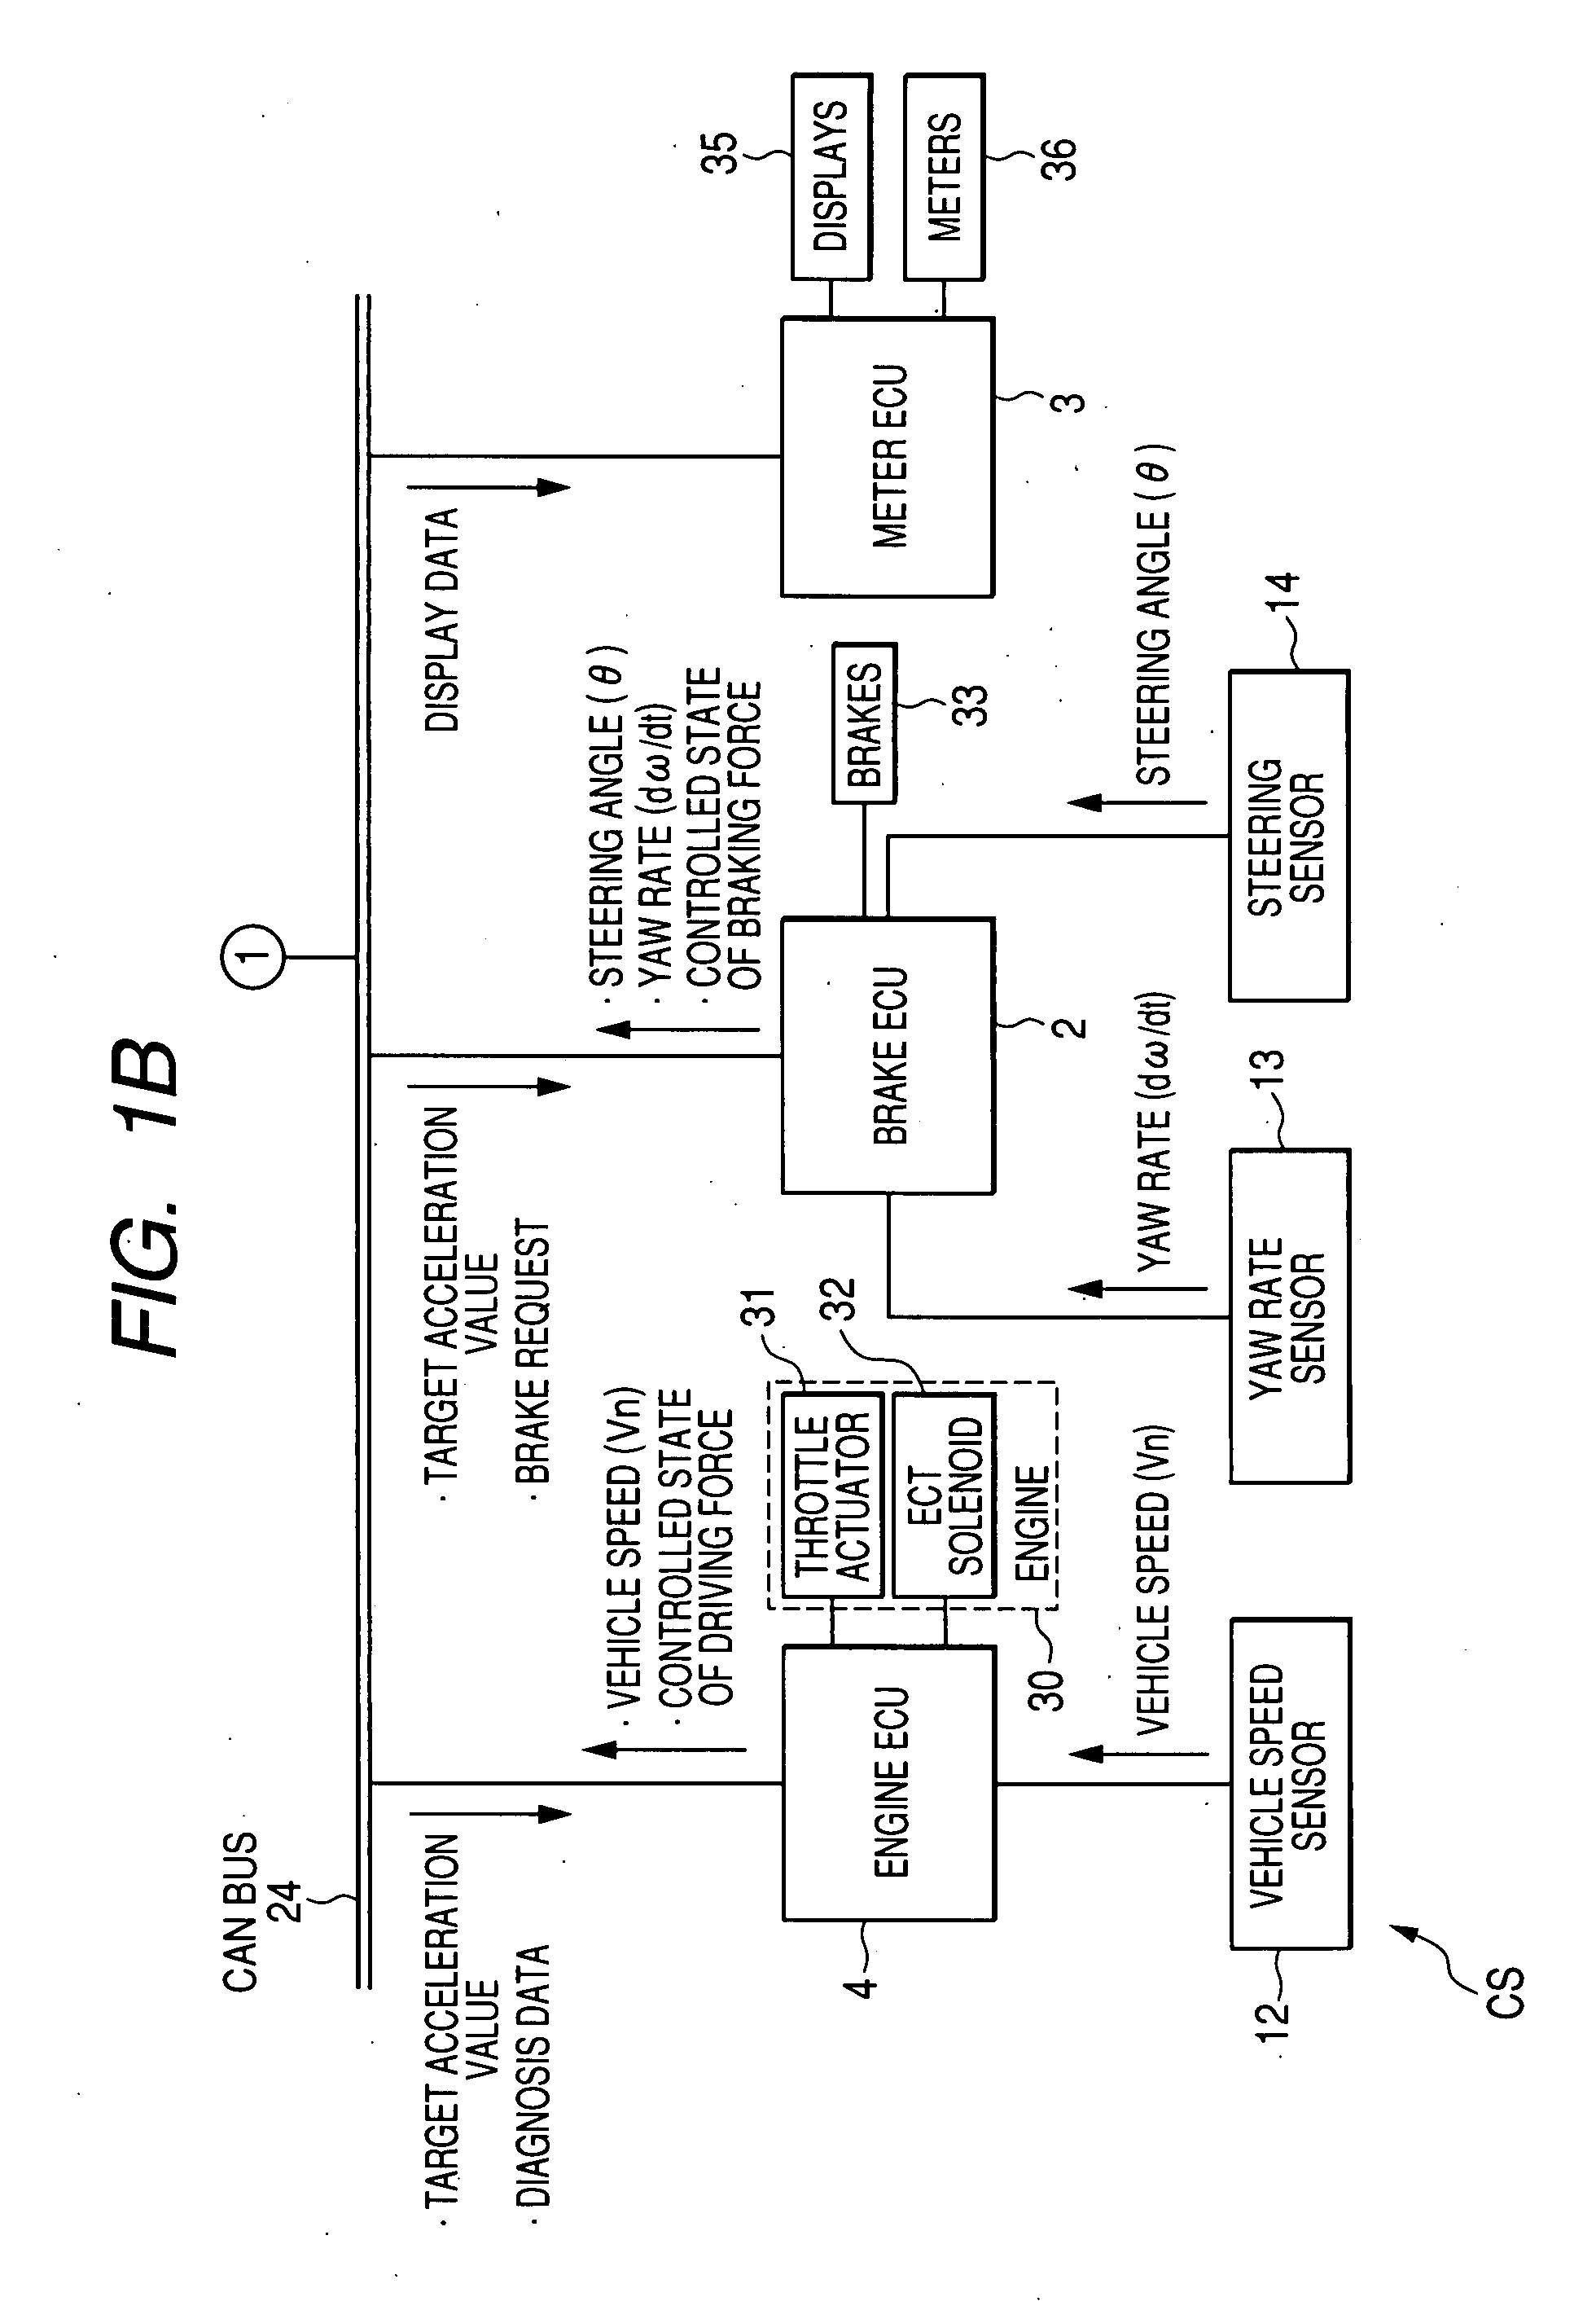 Cruise control system for determining object as target for cruise control